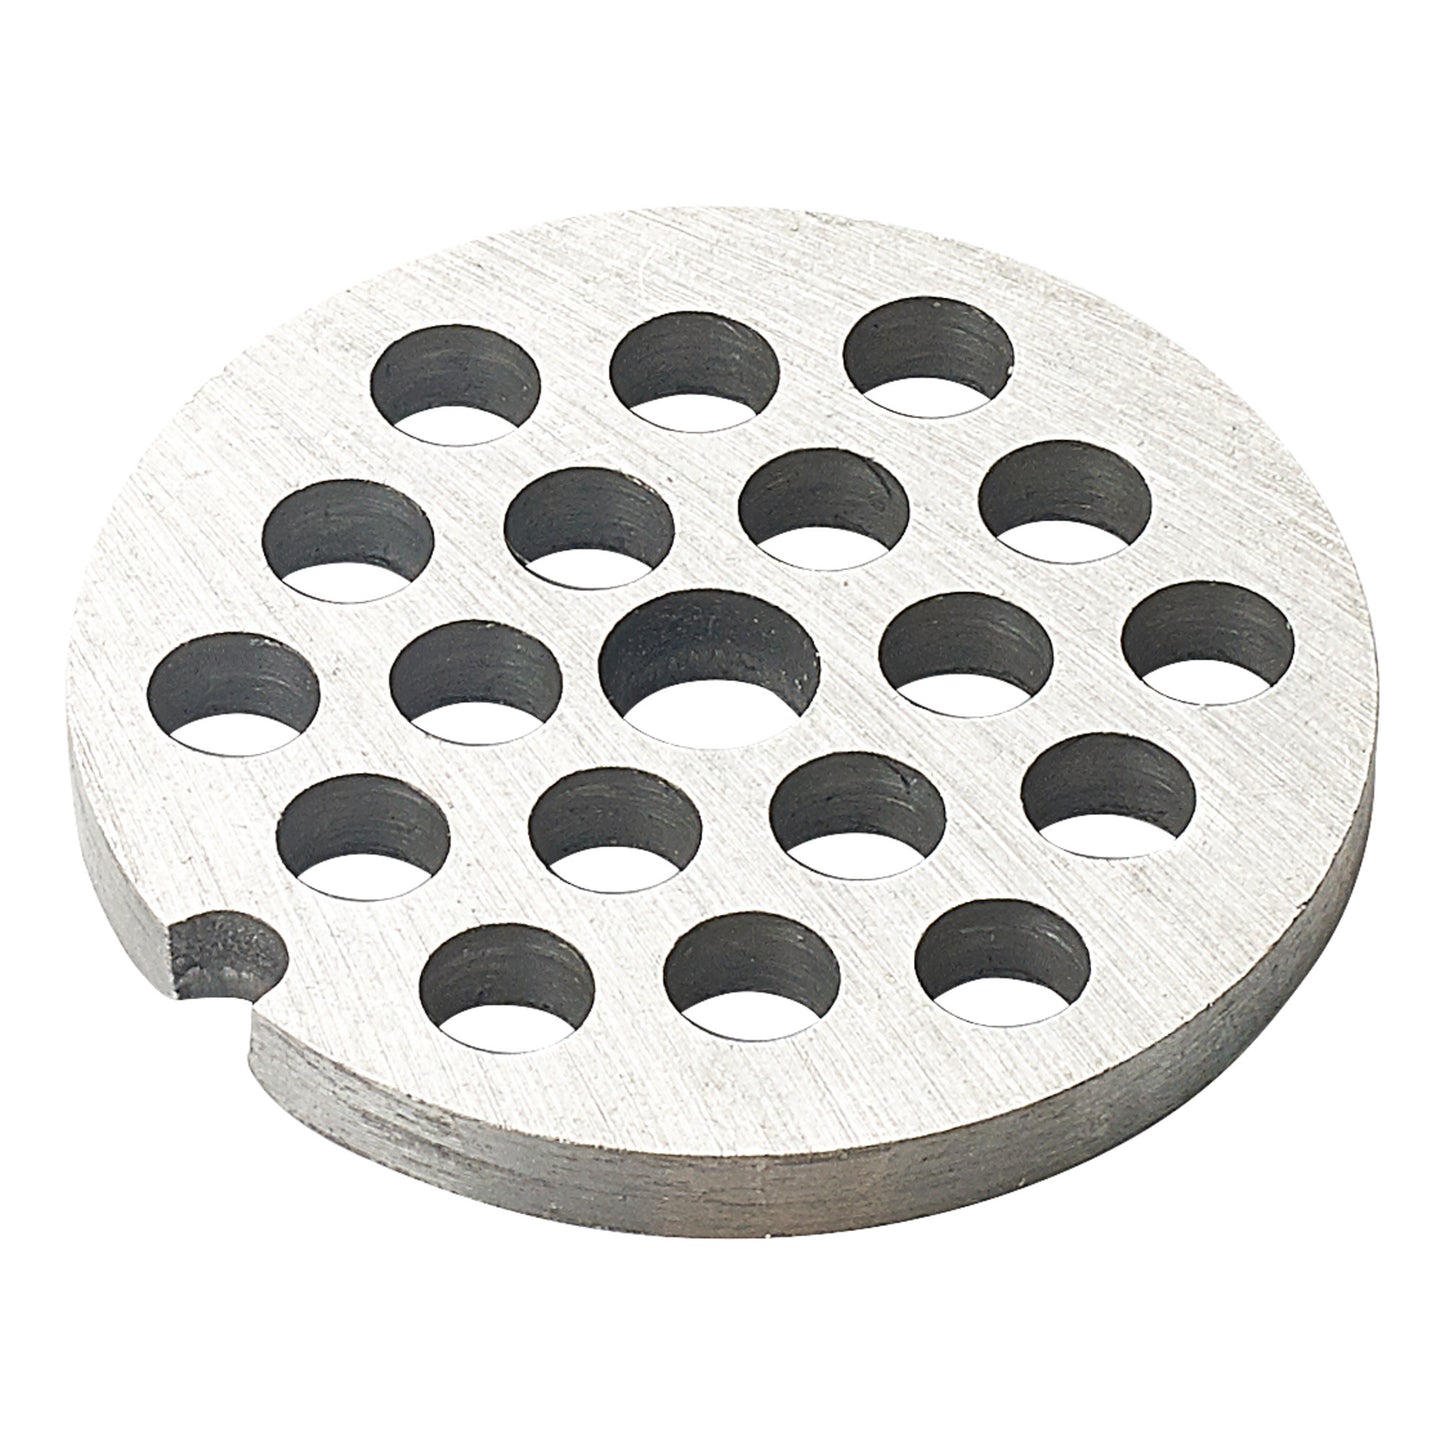 MG-10516 - Grinder Plate for MG-10 - 5/16" (8mm)